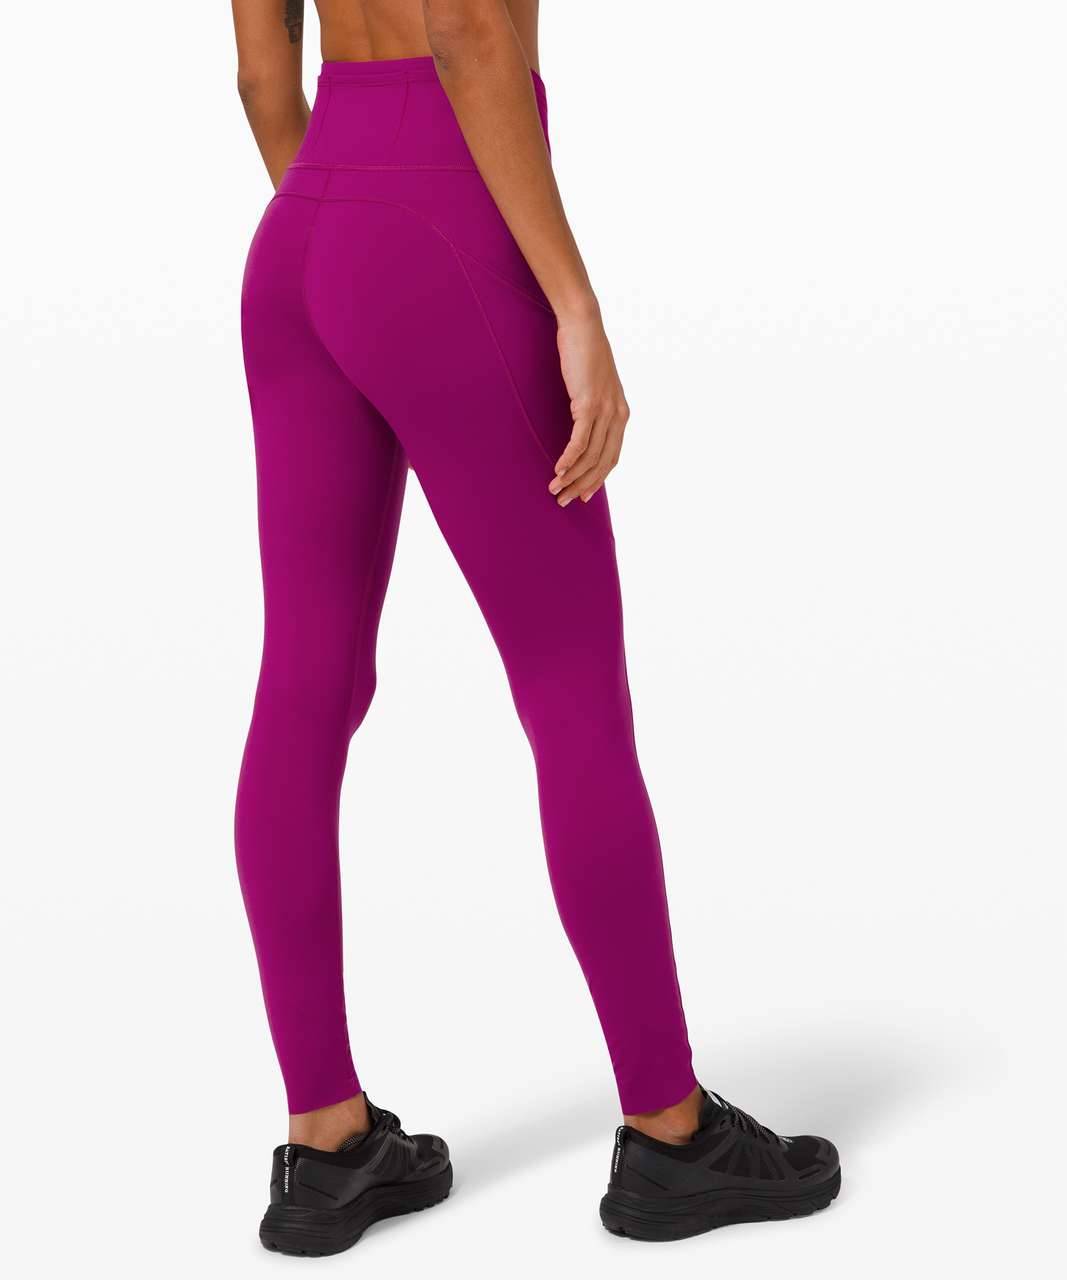 Lululemon Fast and Free High-Rise Tight 28" *Non-Reflective Brushed Nulux - Deep Fuschia